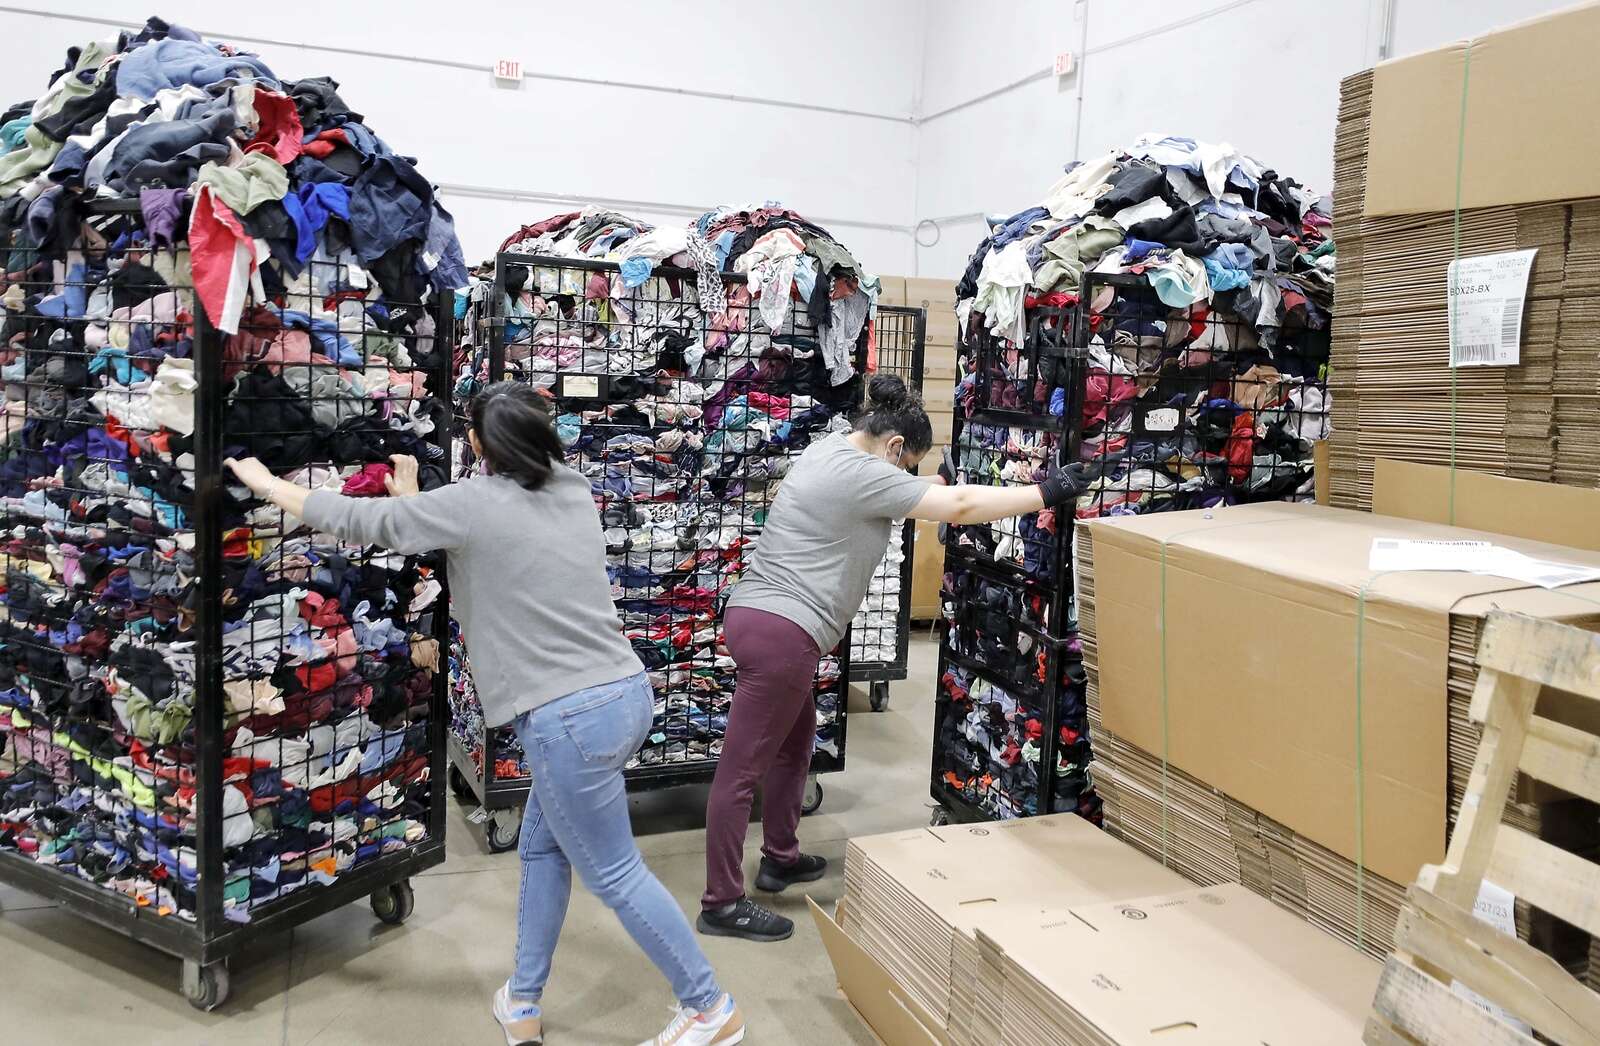 Majority of donated clothes are sold to recyclers: What happens to